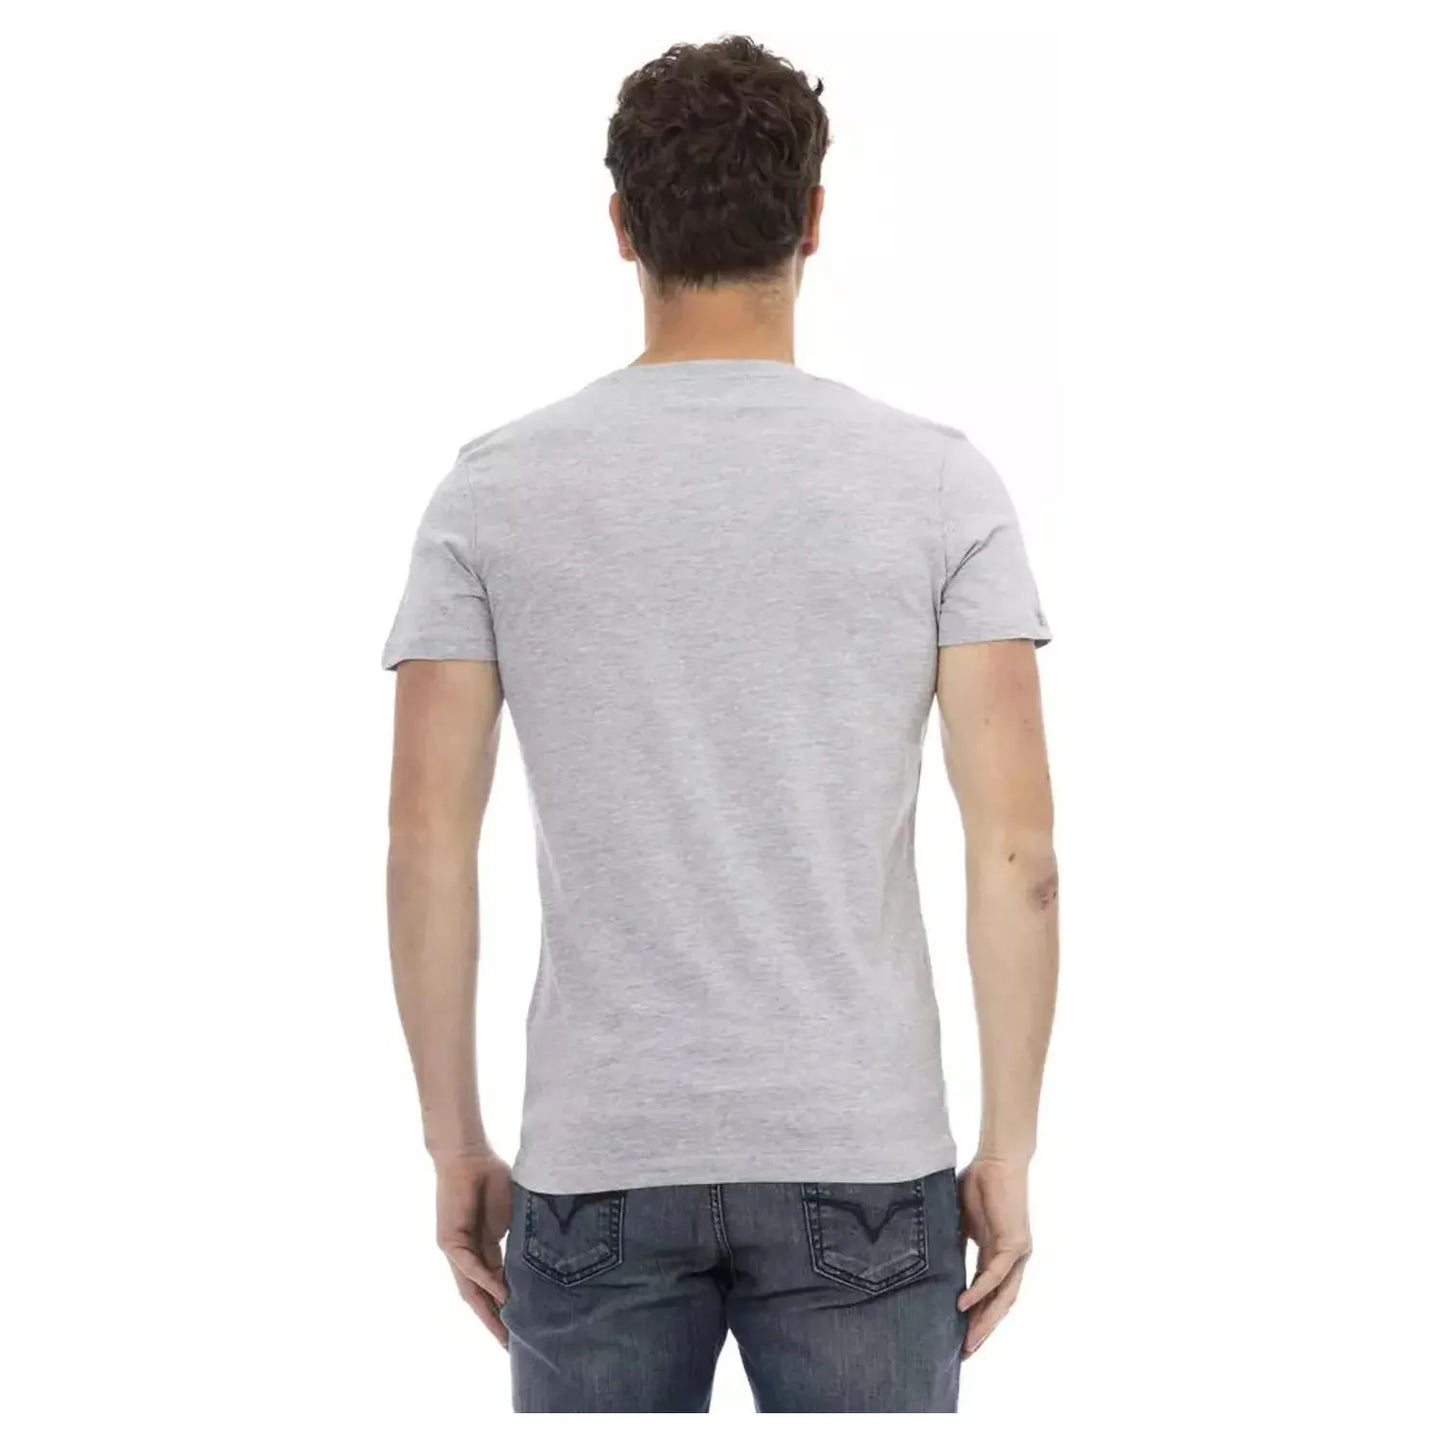 Trussardi Action Sophisticated Gray Tee with Elegant Front Print gray-cotton-t-shirt-65